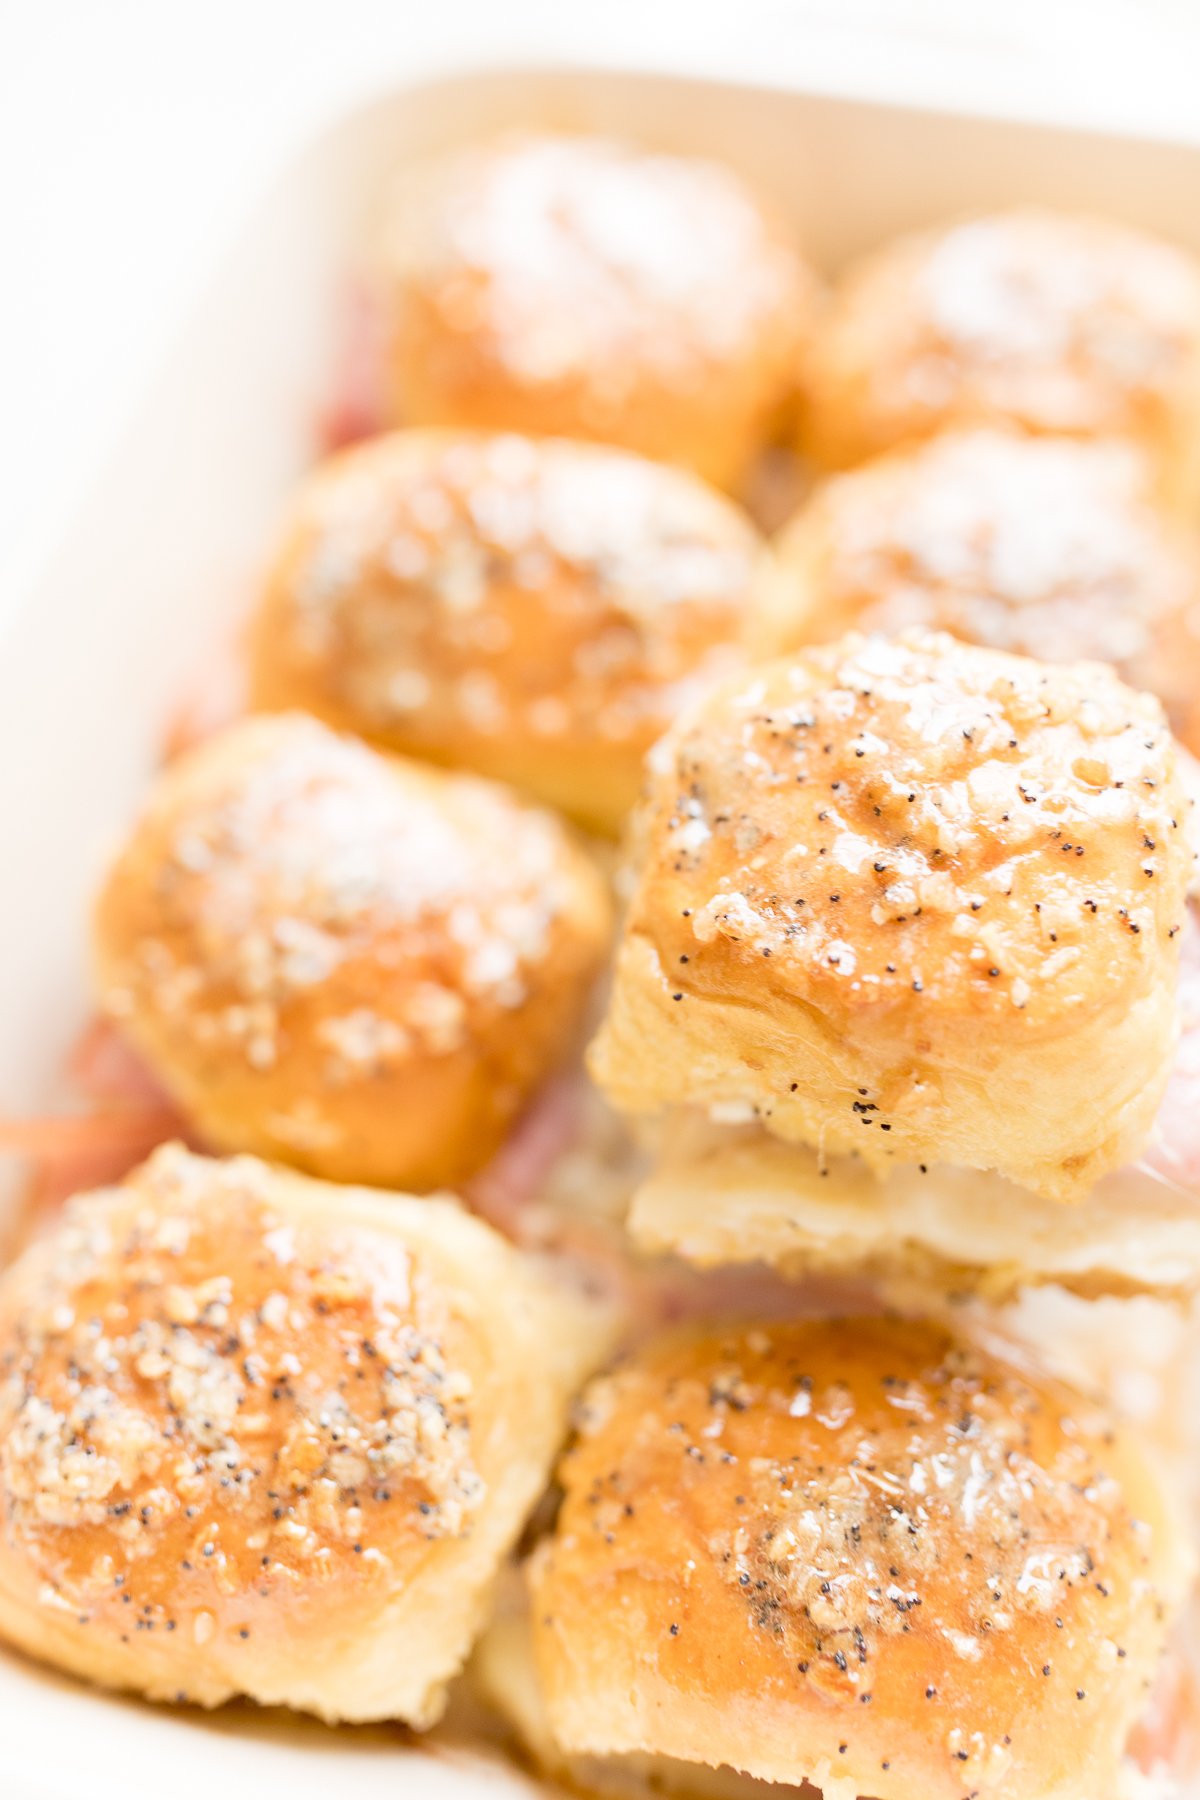 A mouthwatering display of hot ham and cheese sliders, beautifully presented in a white dish.